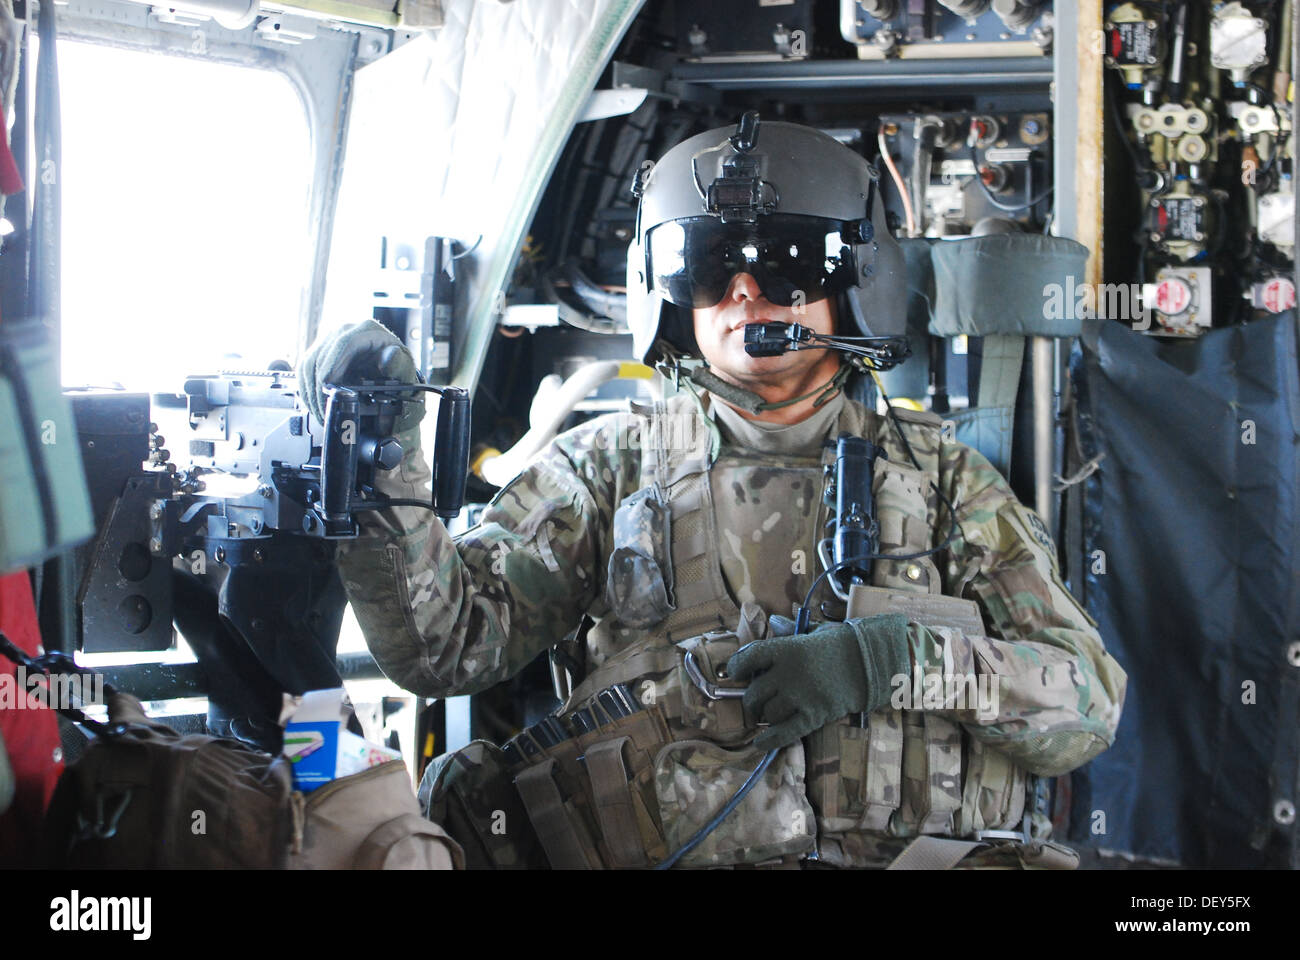 Staff Sgt. Ignacio Lopez, a CH-47 Chinook helicopter flight engineer assigned to B Company, 2nd Battalion (General Support), 149th Aviation Regiment (Texas/Oklahoma National Guard), serving under the 10th Combat Aviation Brigade, communicates with the air Stock Photo